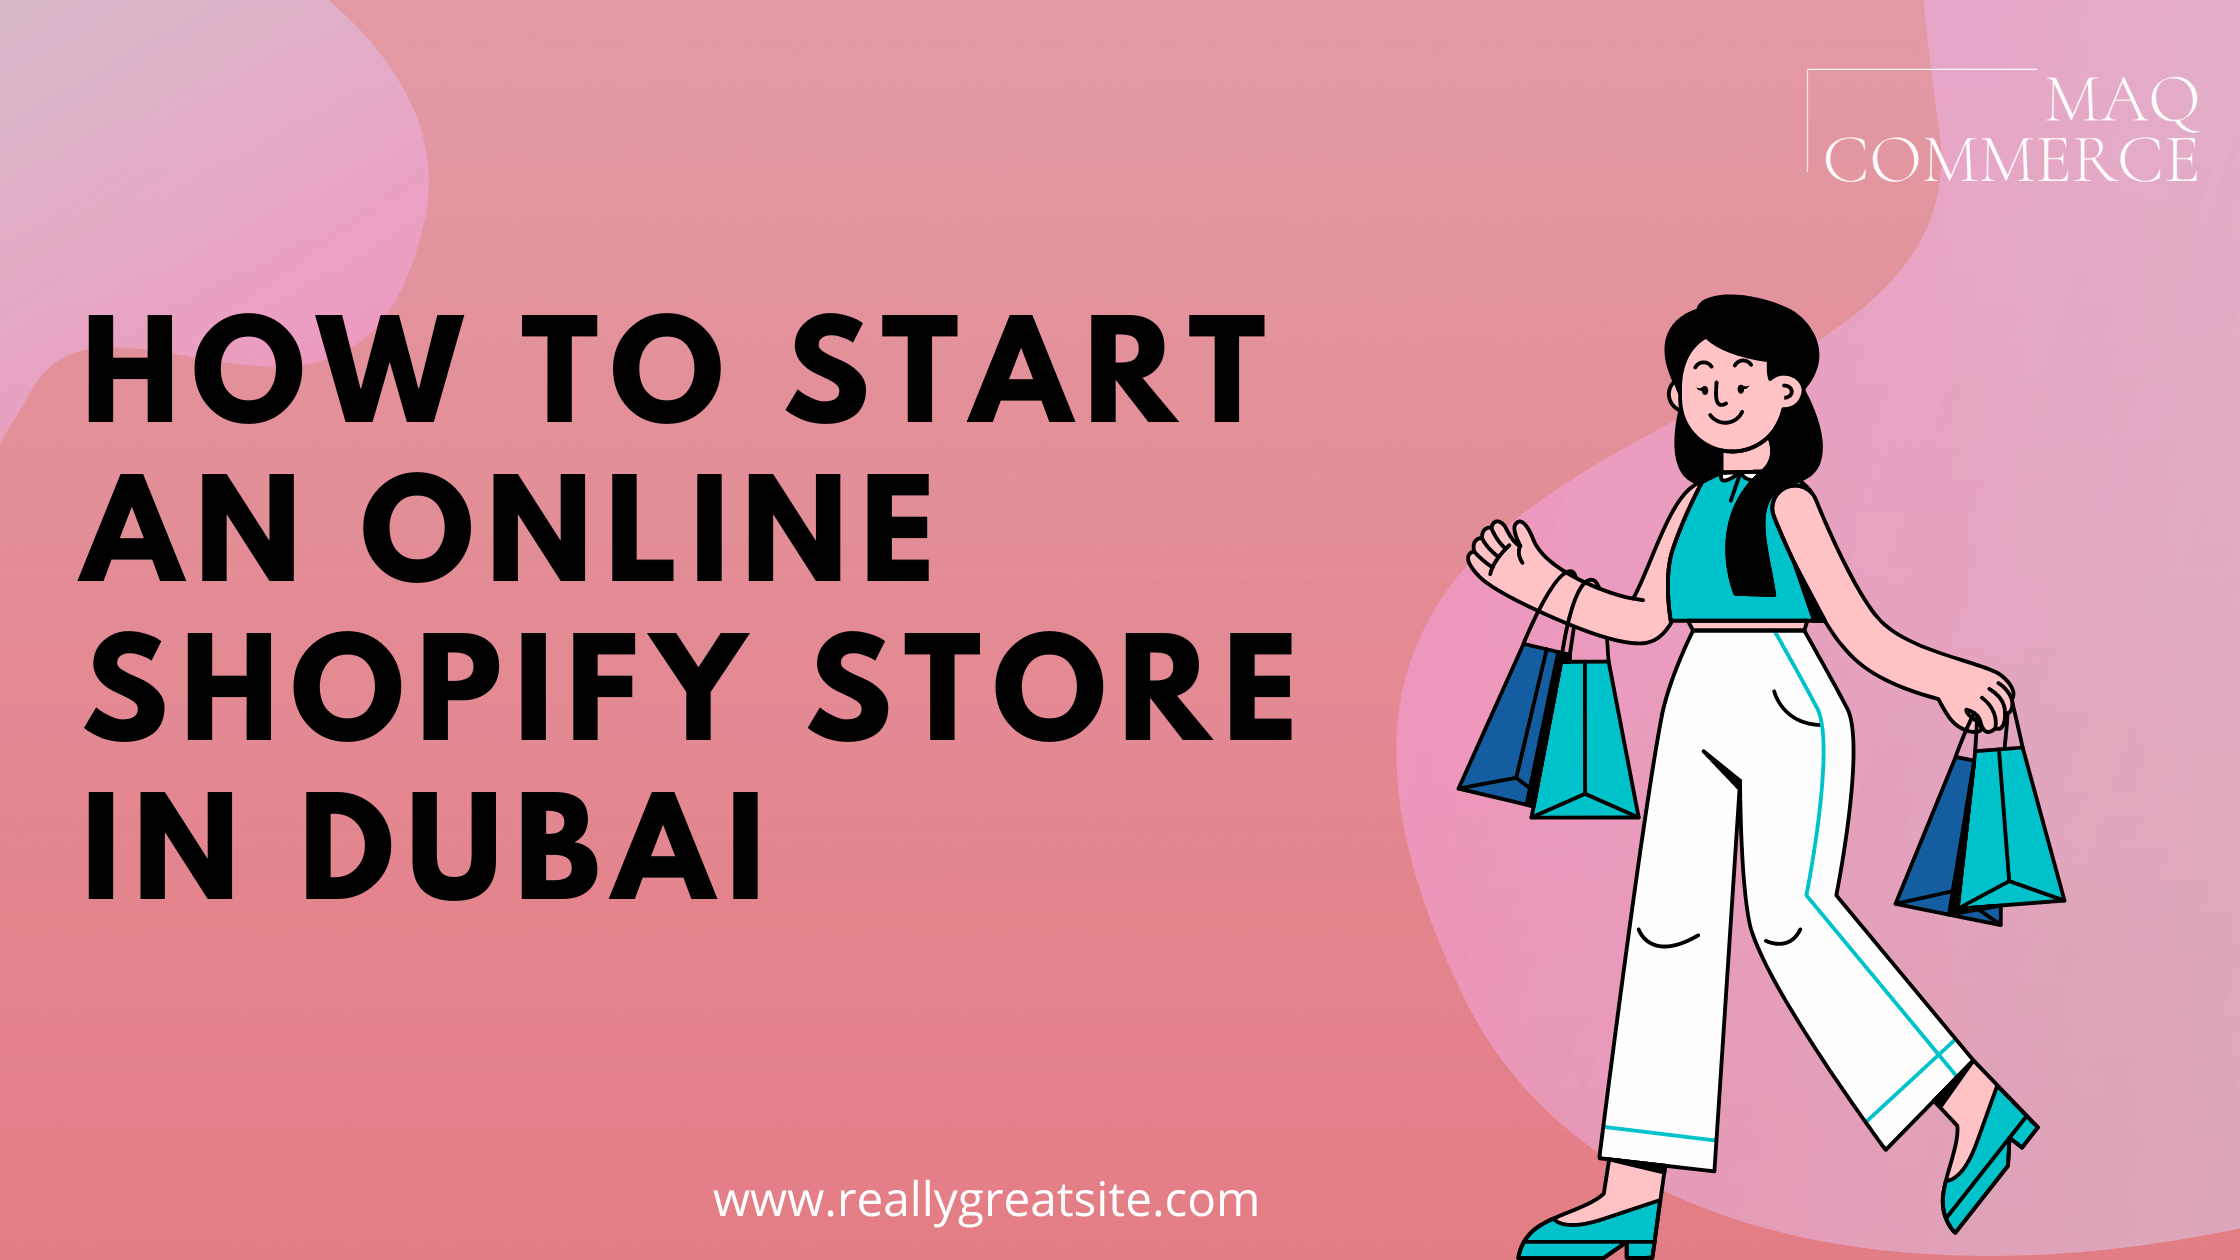 SHOPIFY UAE- HOW TO START AN ONLINE SHOPIFY STORE IN DUBAI